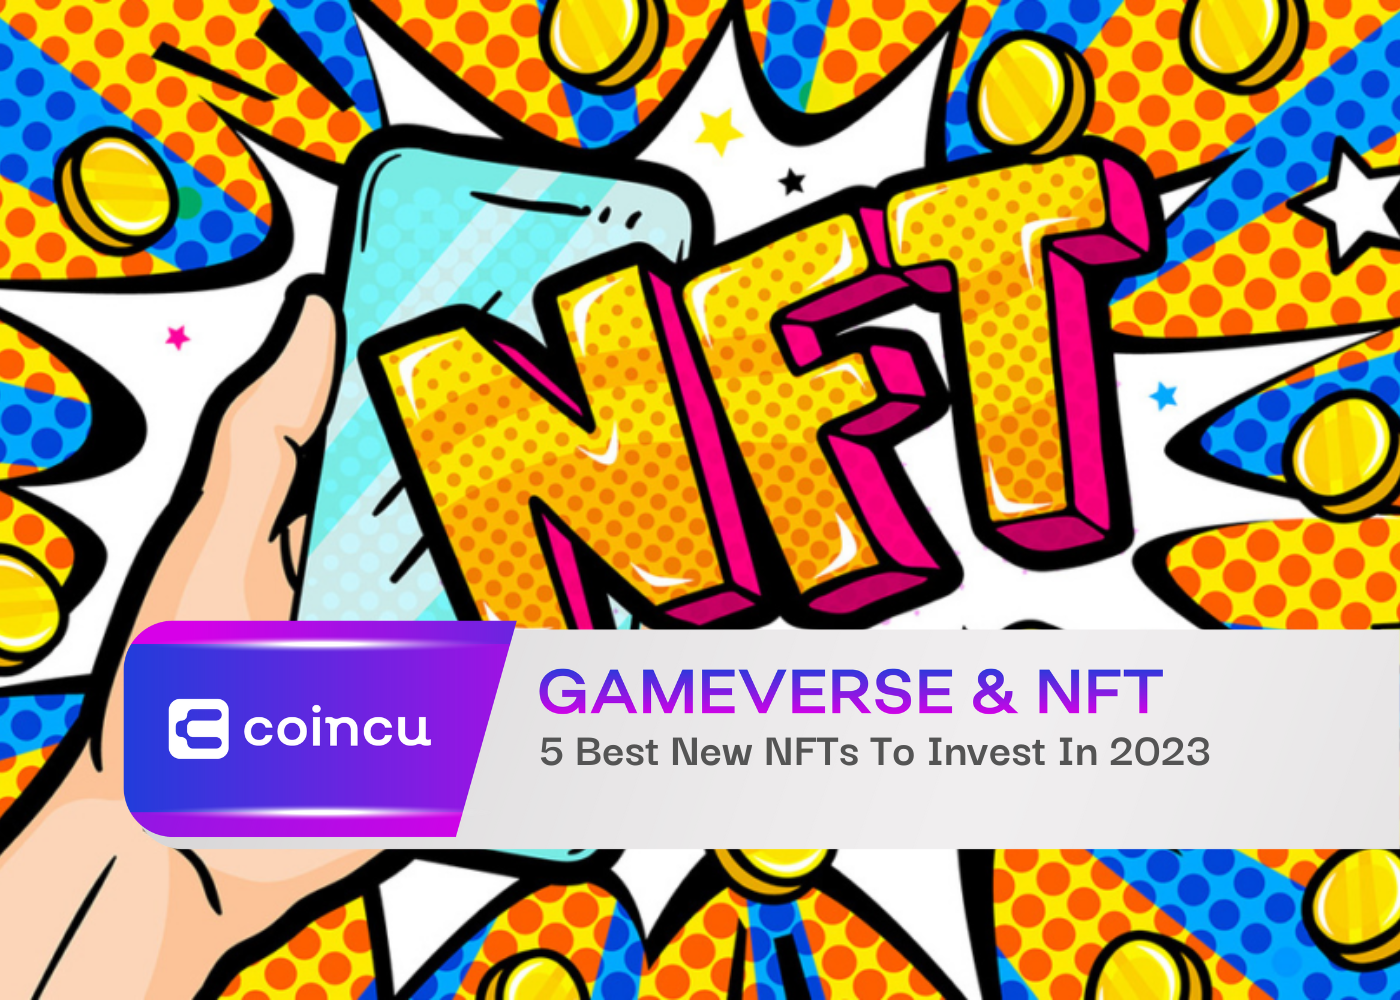 5 Best New NFTs To Invest In 2023